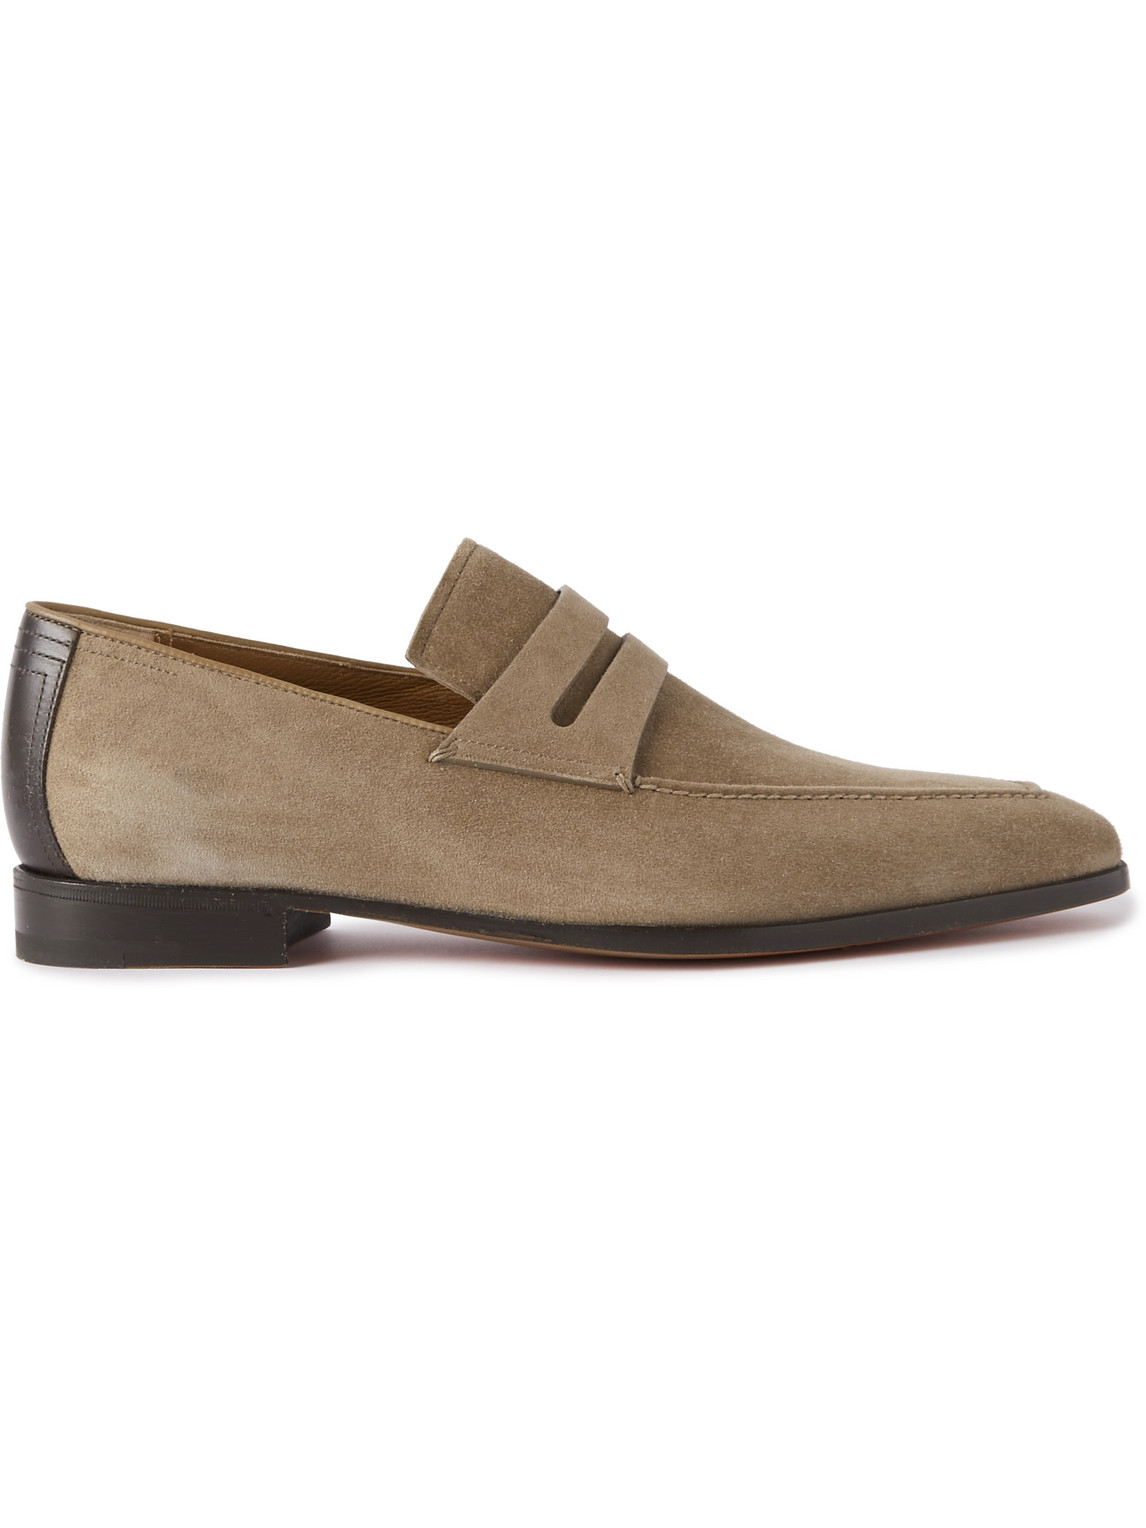 Leather-Trimmed Suede Penny Loafers